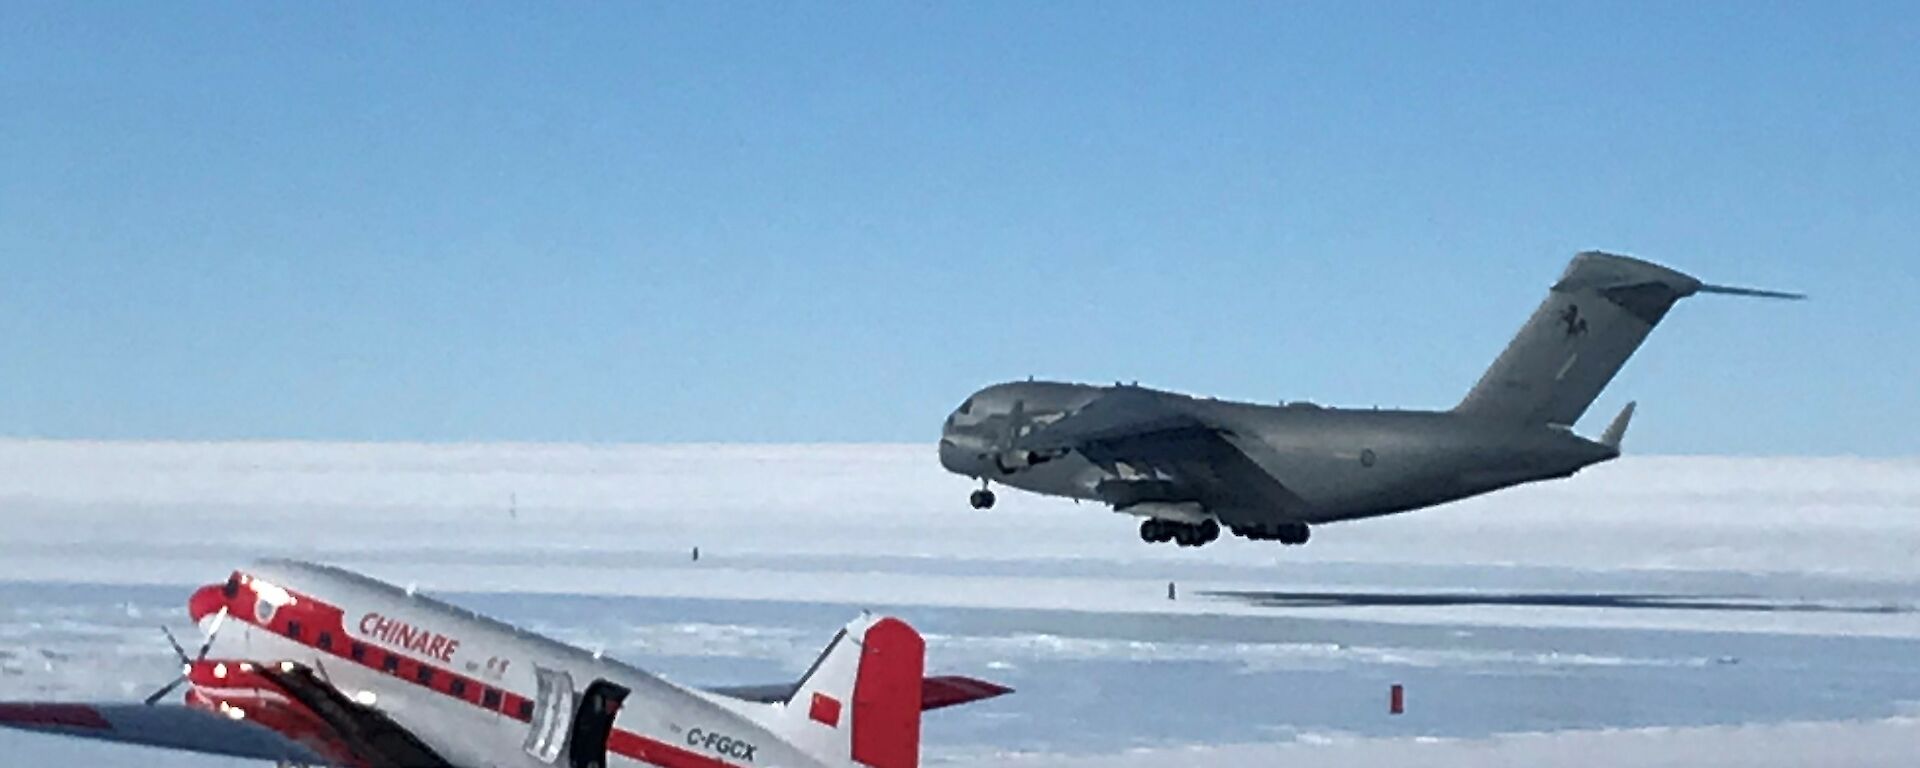 C-17, large grey military aircraft landing on ice runway with red and white basler aircraft on airfield apron in foreground.